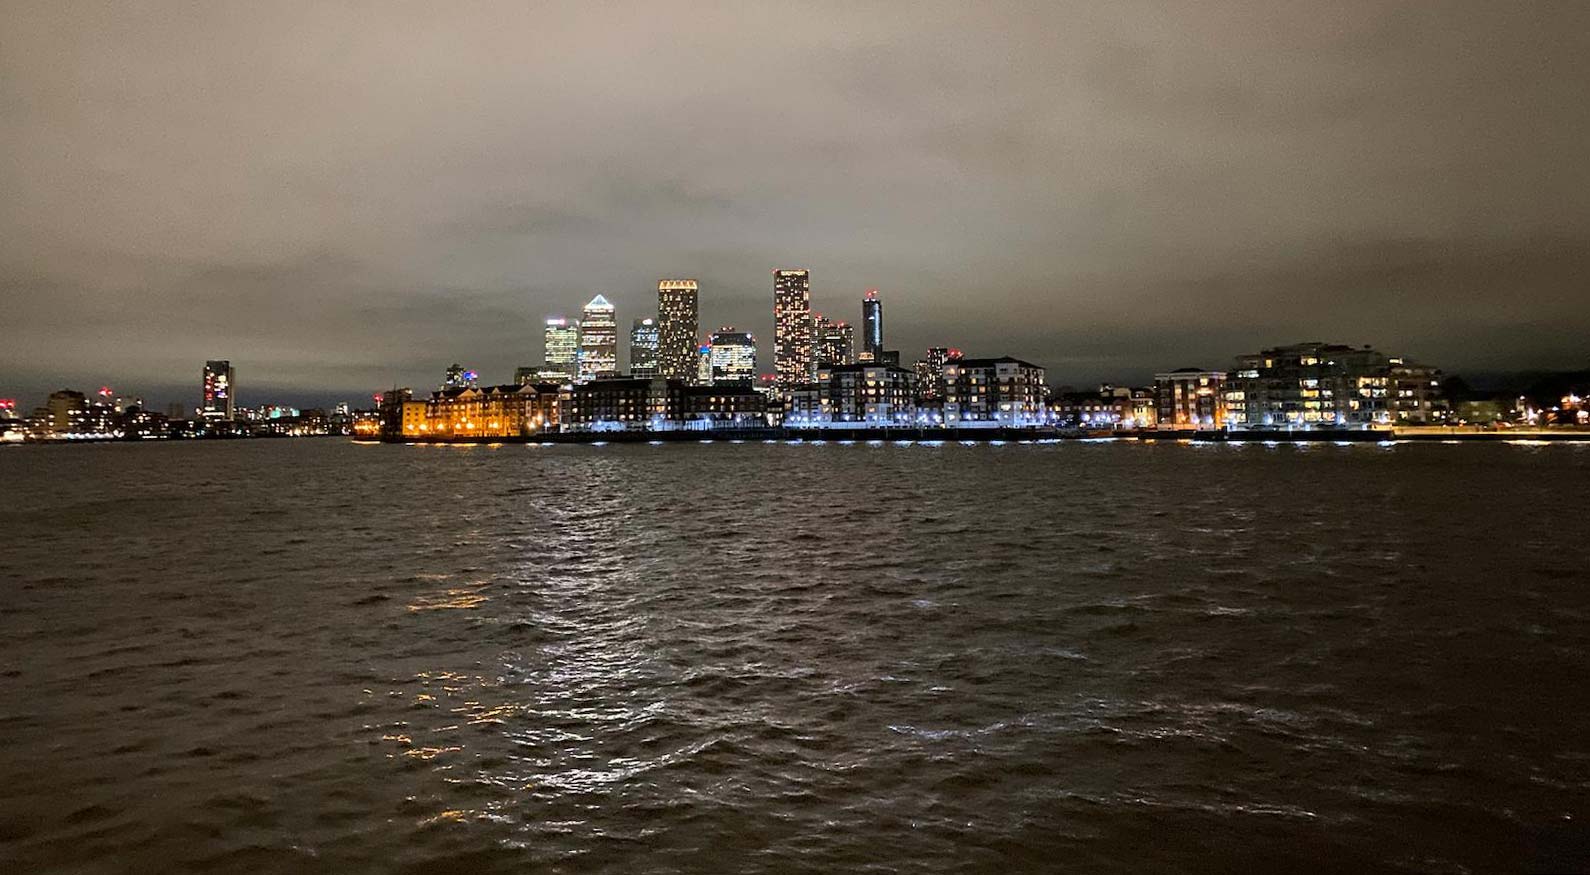 A photo of Canary Wharf at night